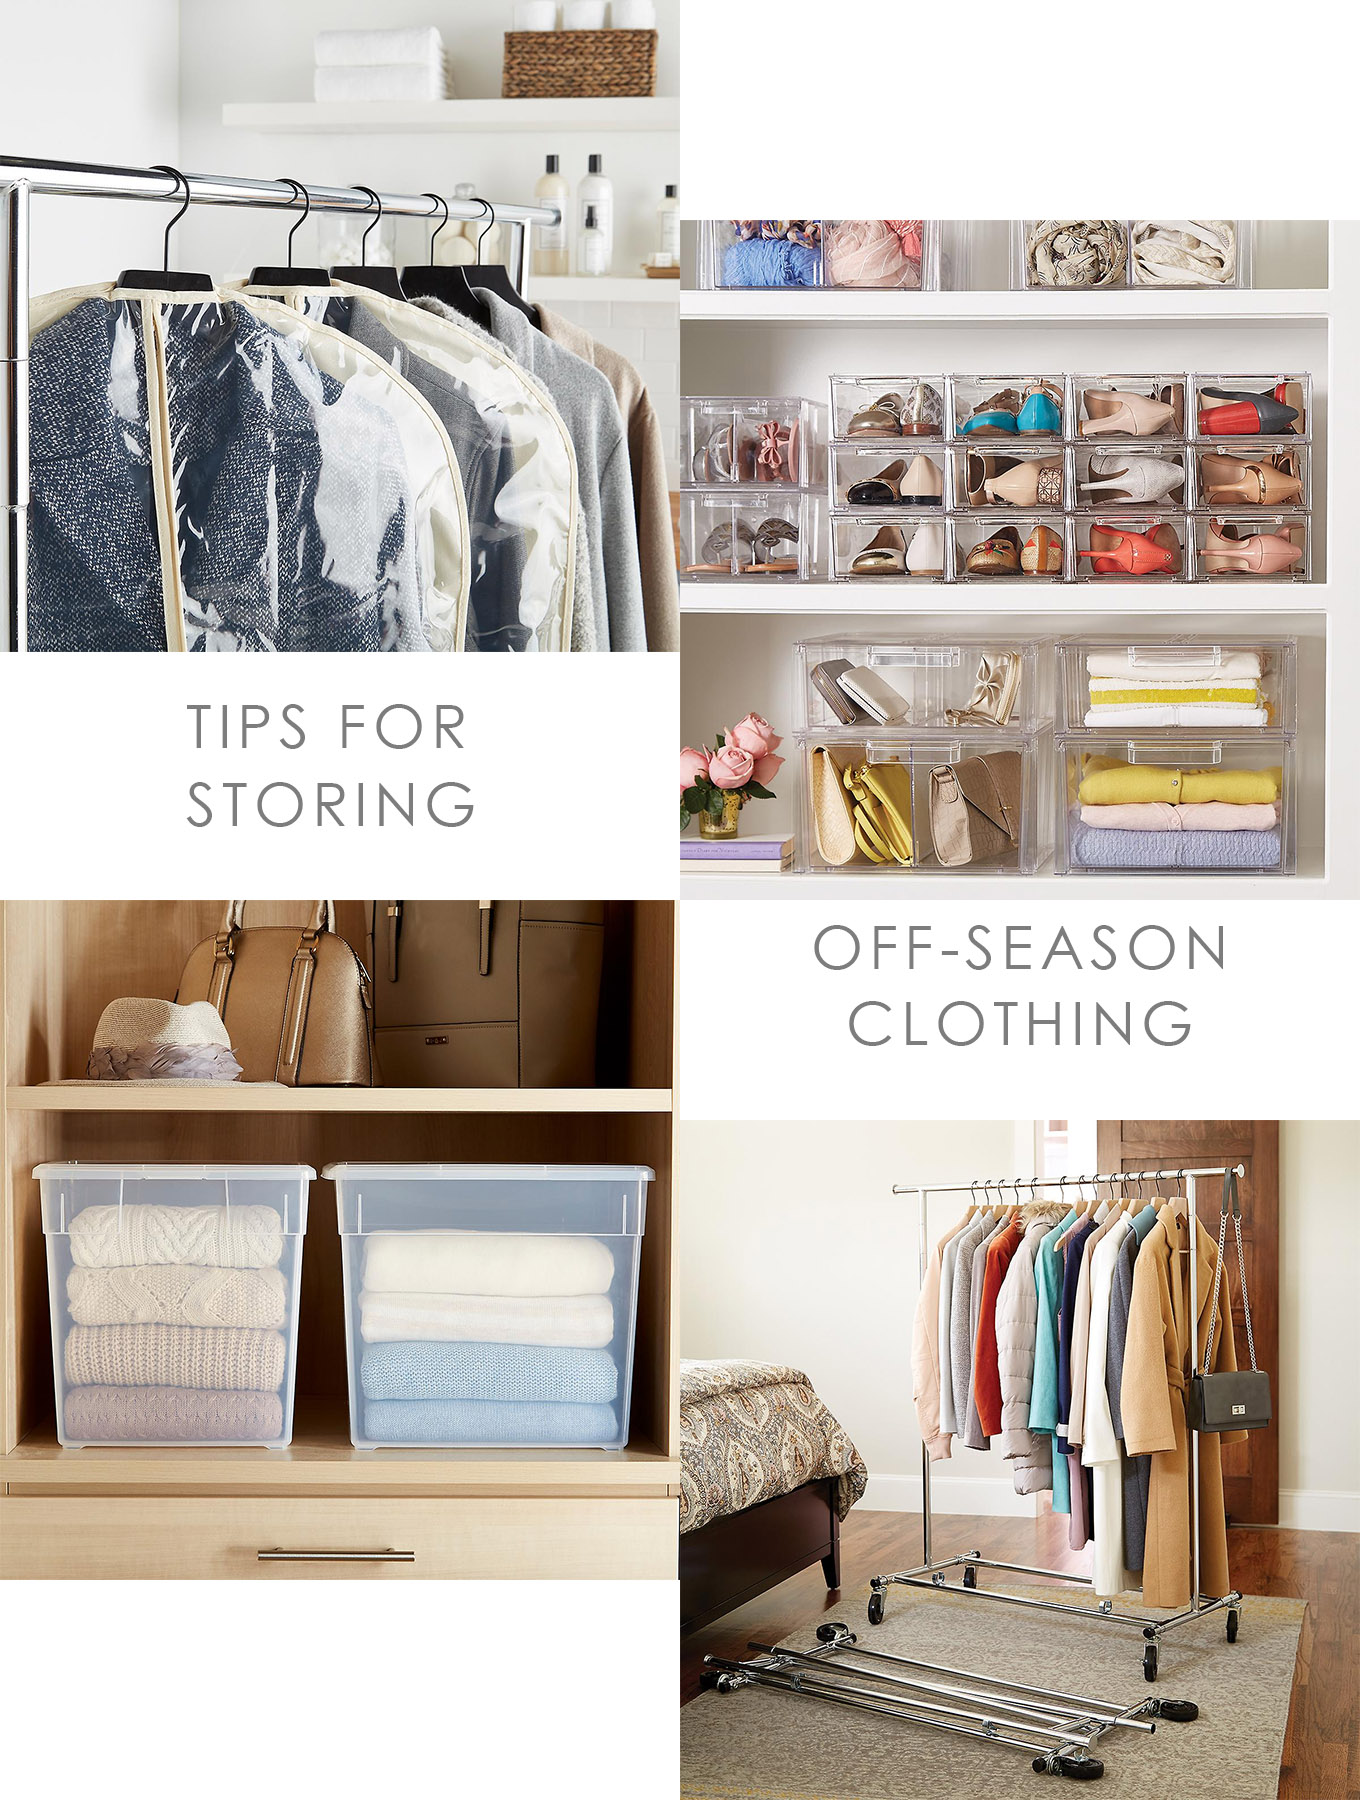 A Few Tips for How to Store Your Clothes (to keep them in good